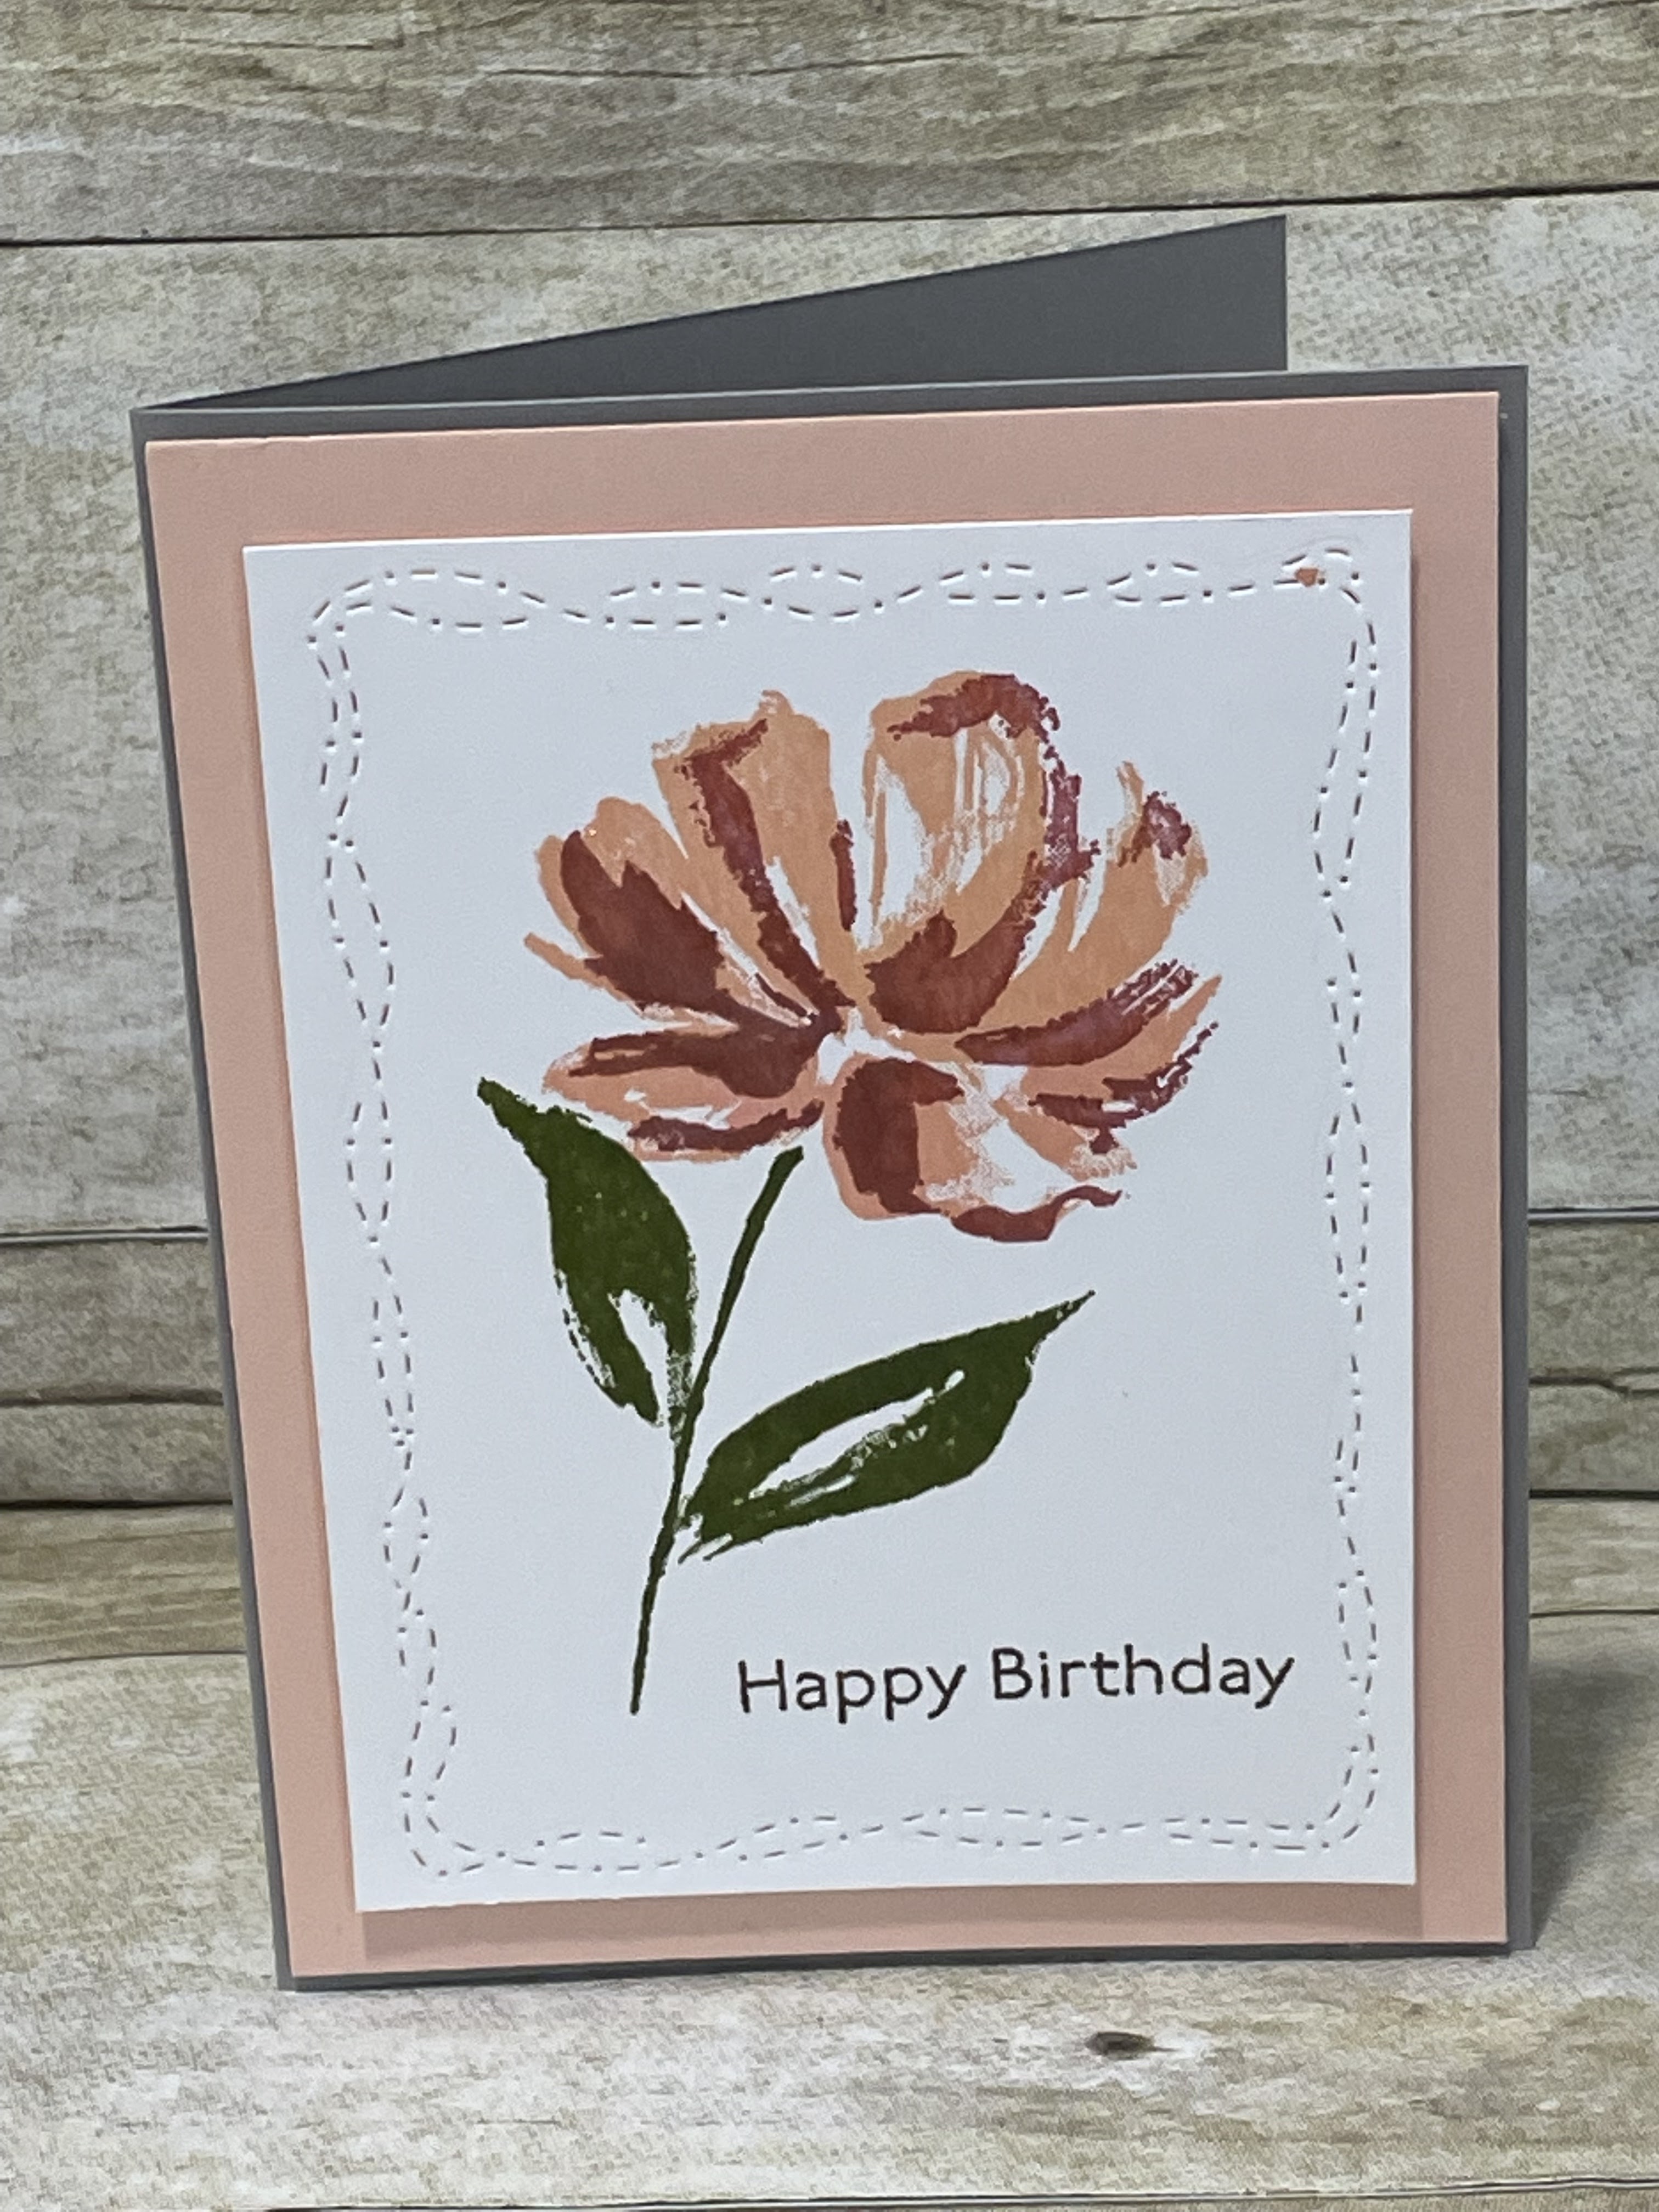 Warm Hugs To You Hot Chocolate Holder - Libby Fens, Stampin' Up!  Demonstrator